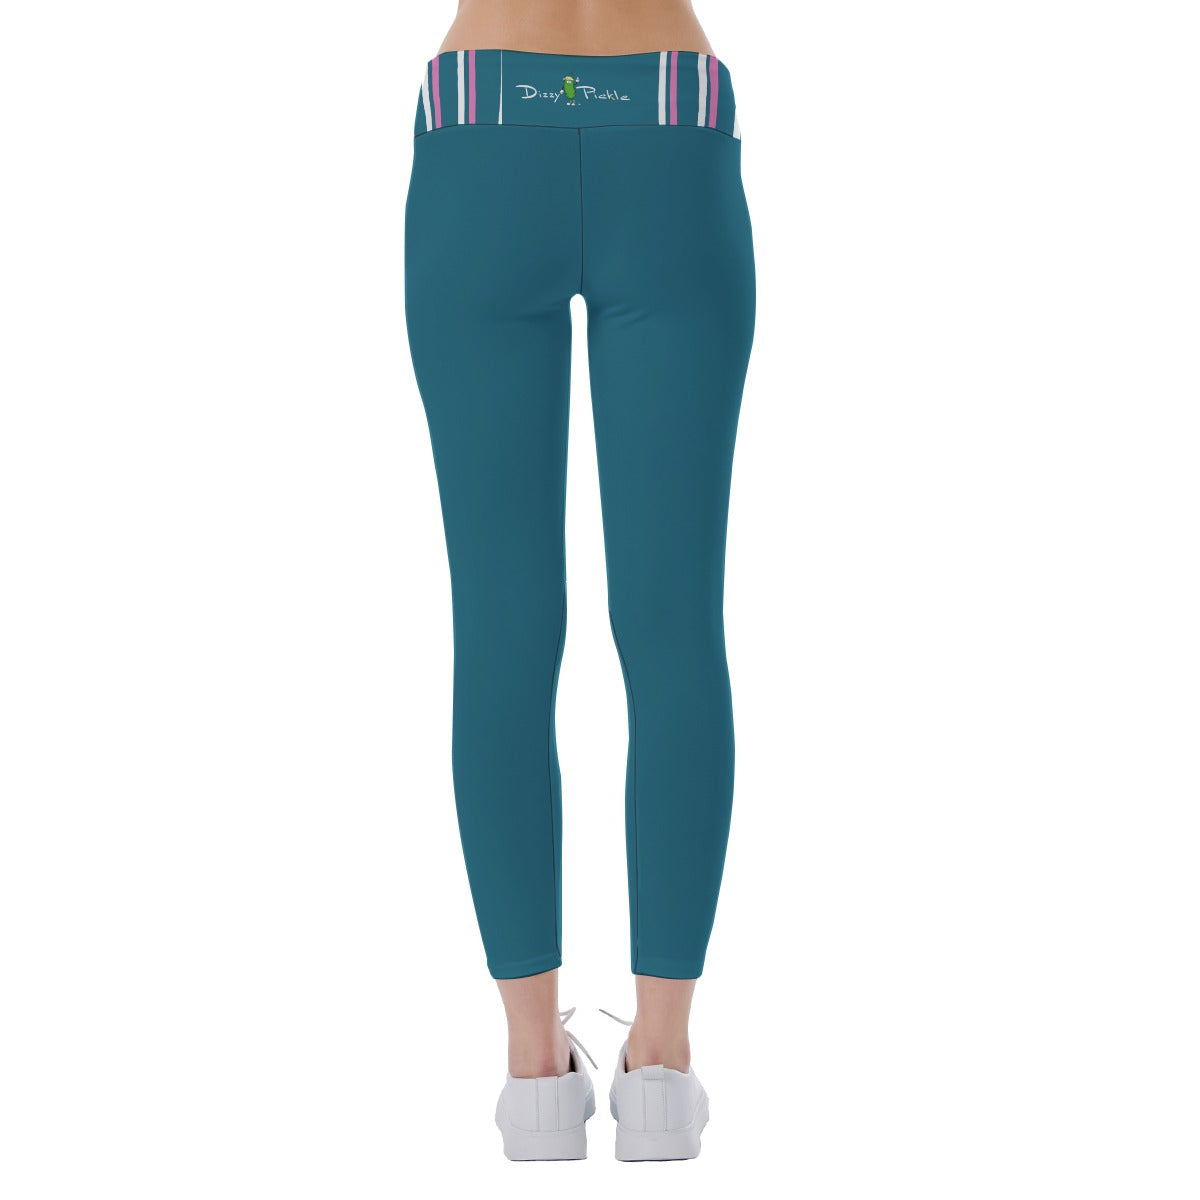 Coming Up Daisies - Peacock/Pink - Stripes - Women's Pickleball Leggings - Mid-Fit - by Dizzy Pickle